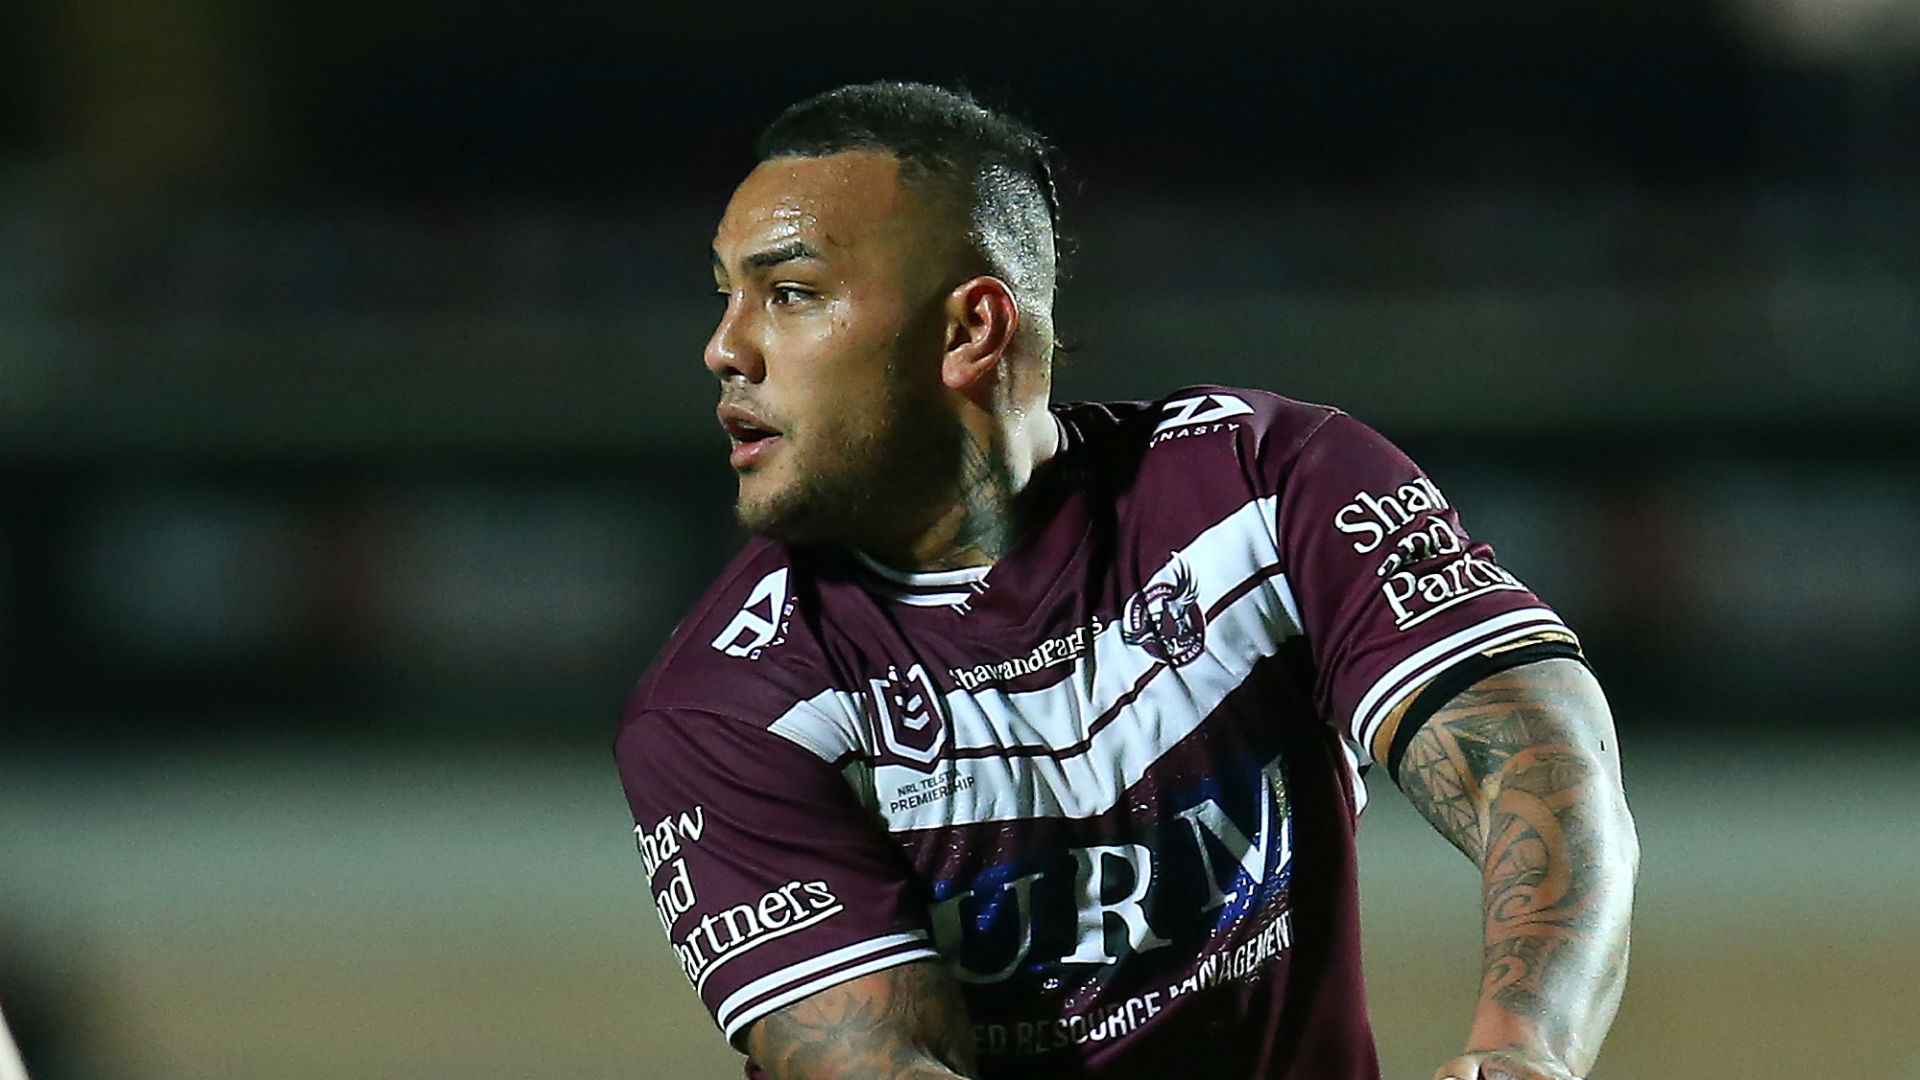 The lack of a penalty try on the final play left Manly Sea Eagles, and Addin Fonua-Blake in particular, irate with referee Grant Atkins.